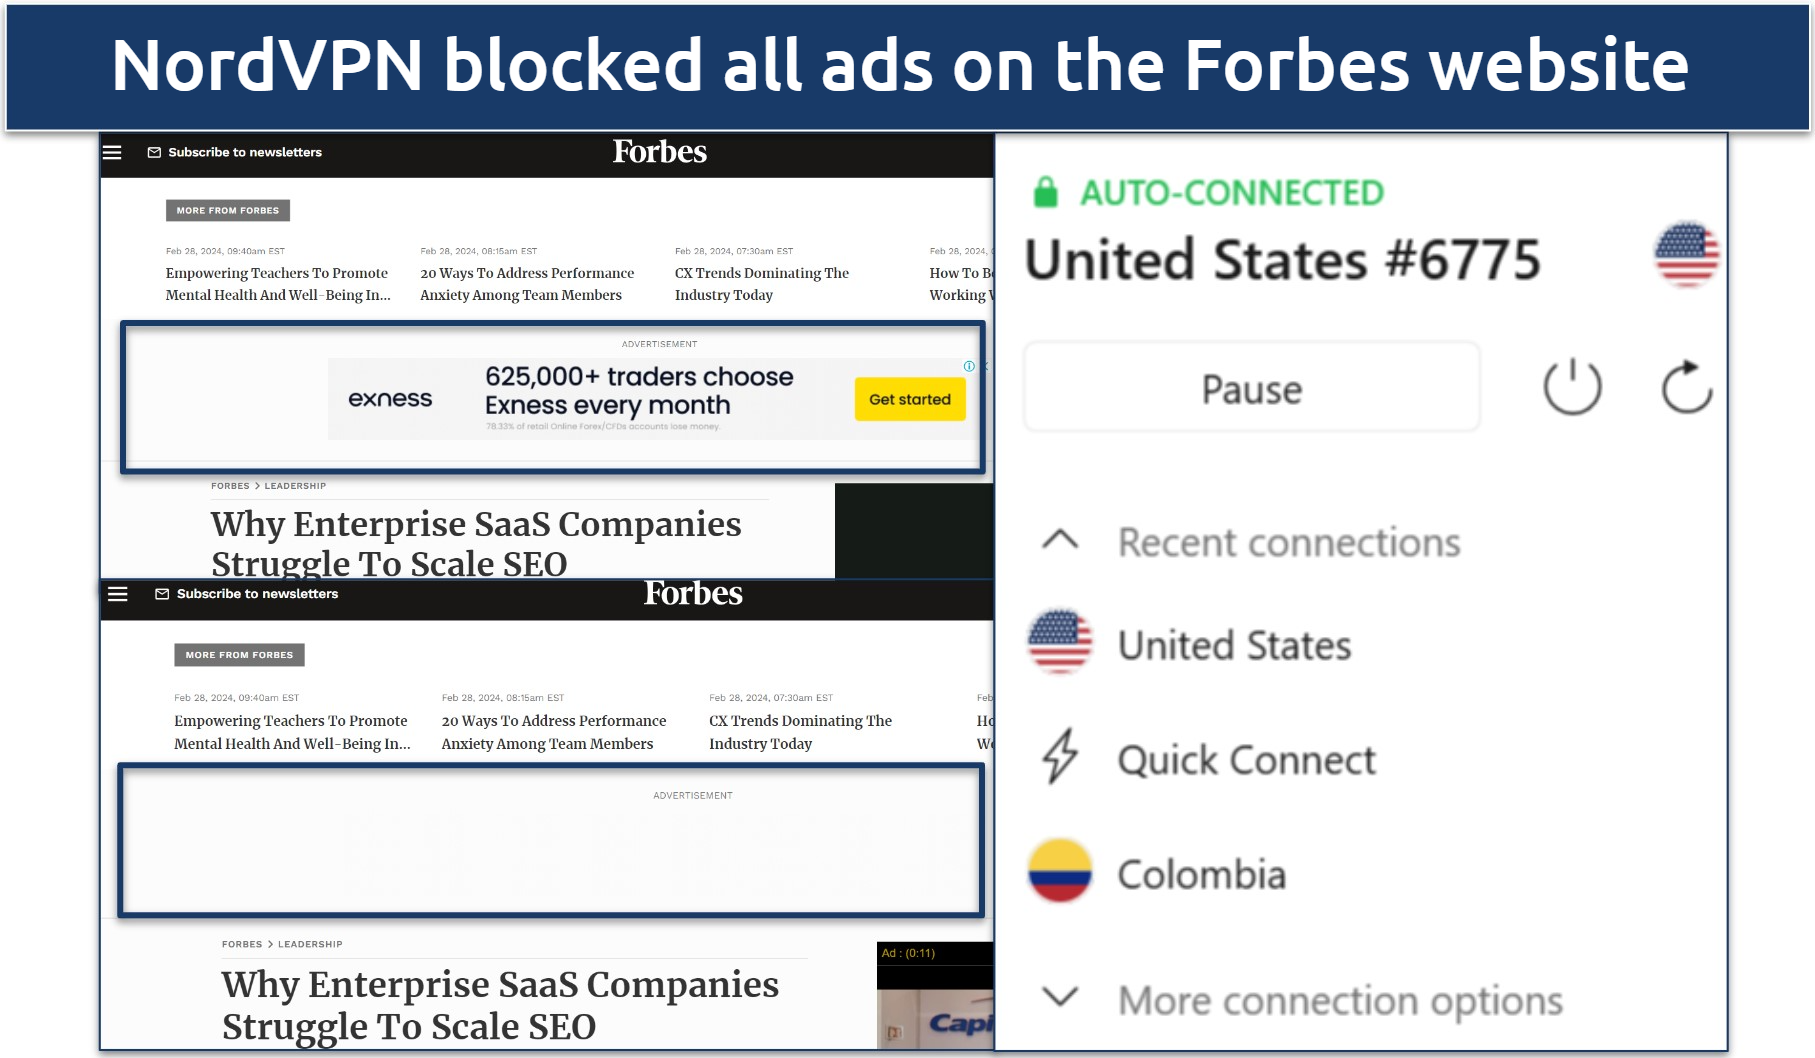 A screenshot of NordVPN blocking all ads on the Forbes website